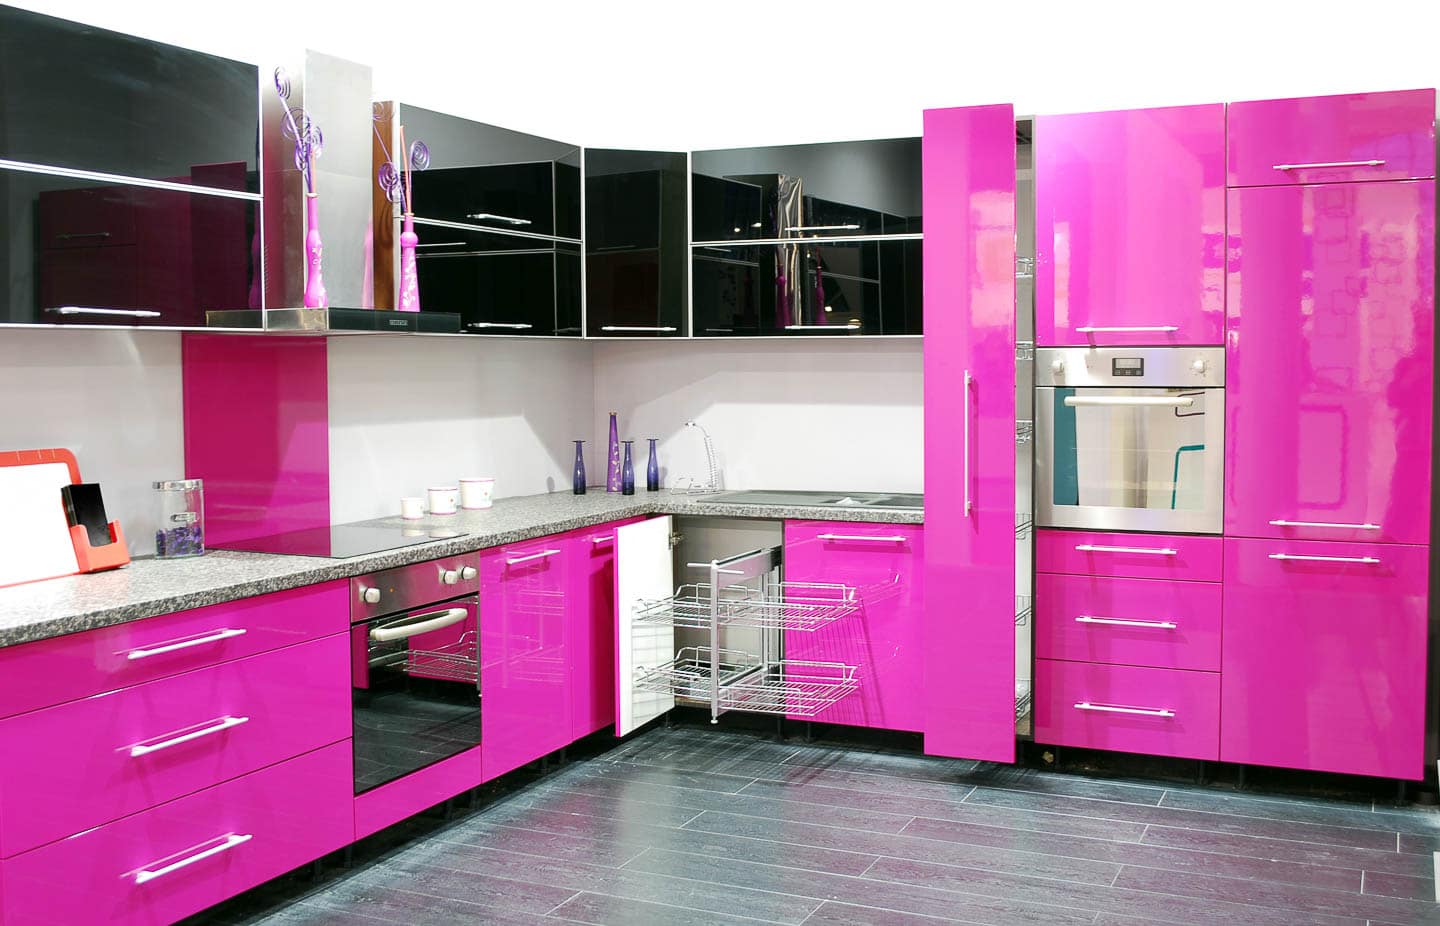 Black and bright pink kitchen cabinets with gray floors and a white backsplash